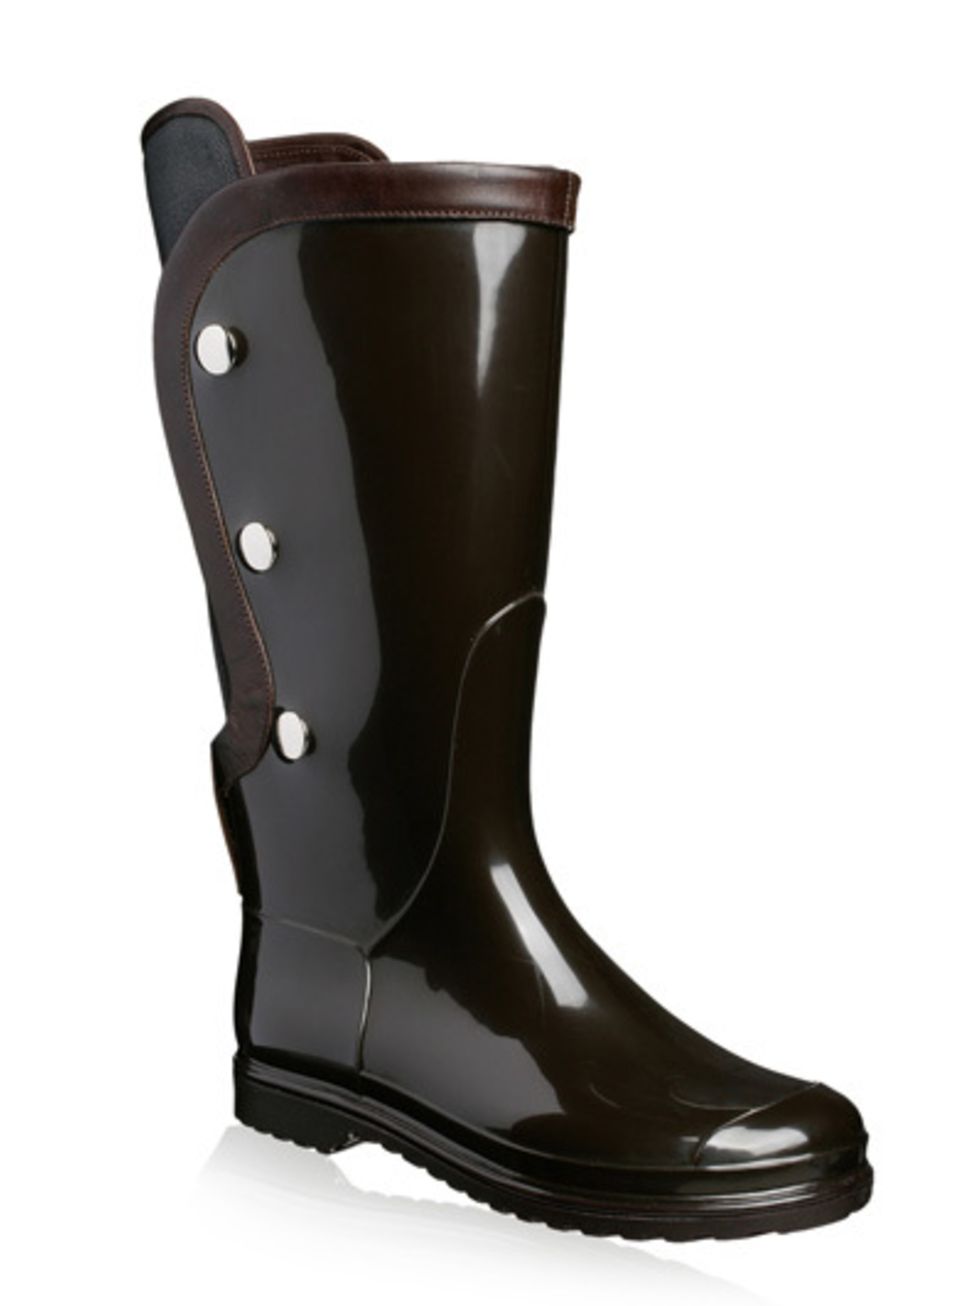 Brown, Boot, Shoe, Riding boot, Liver, Tan, Leather, Knee-high boot, Motorcycle boot, Rain boot, 